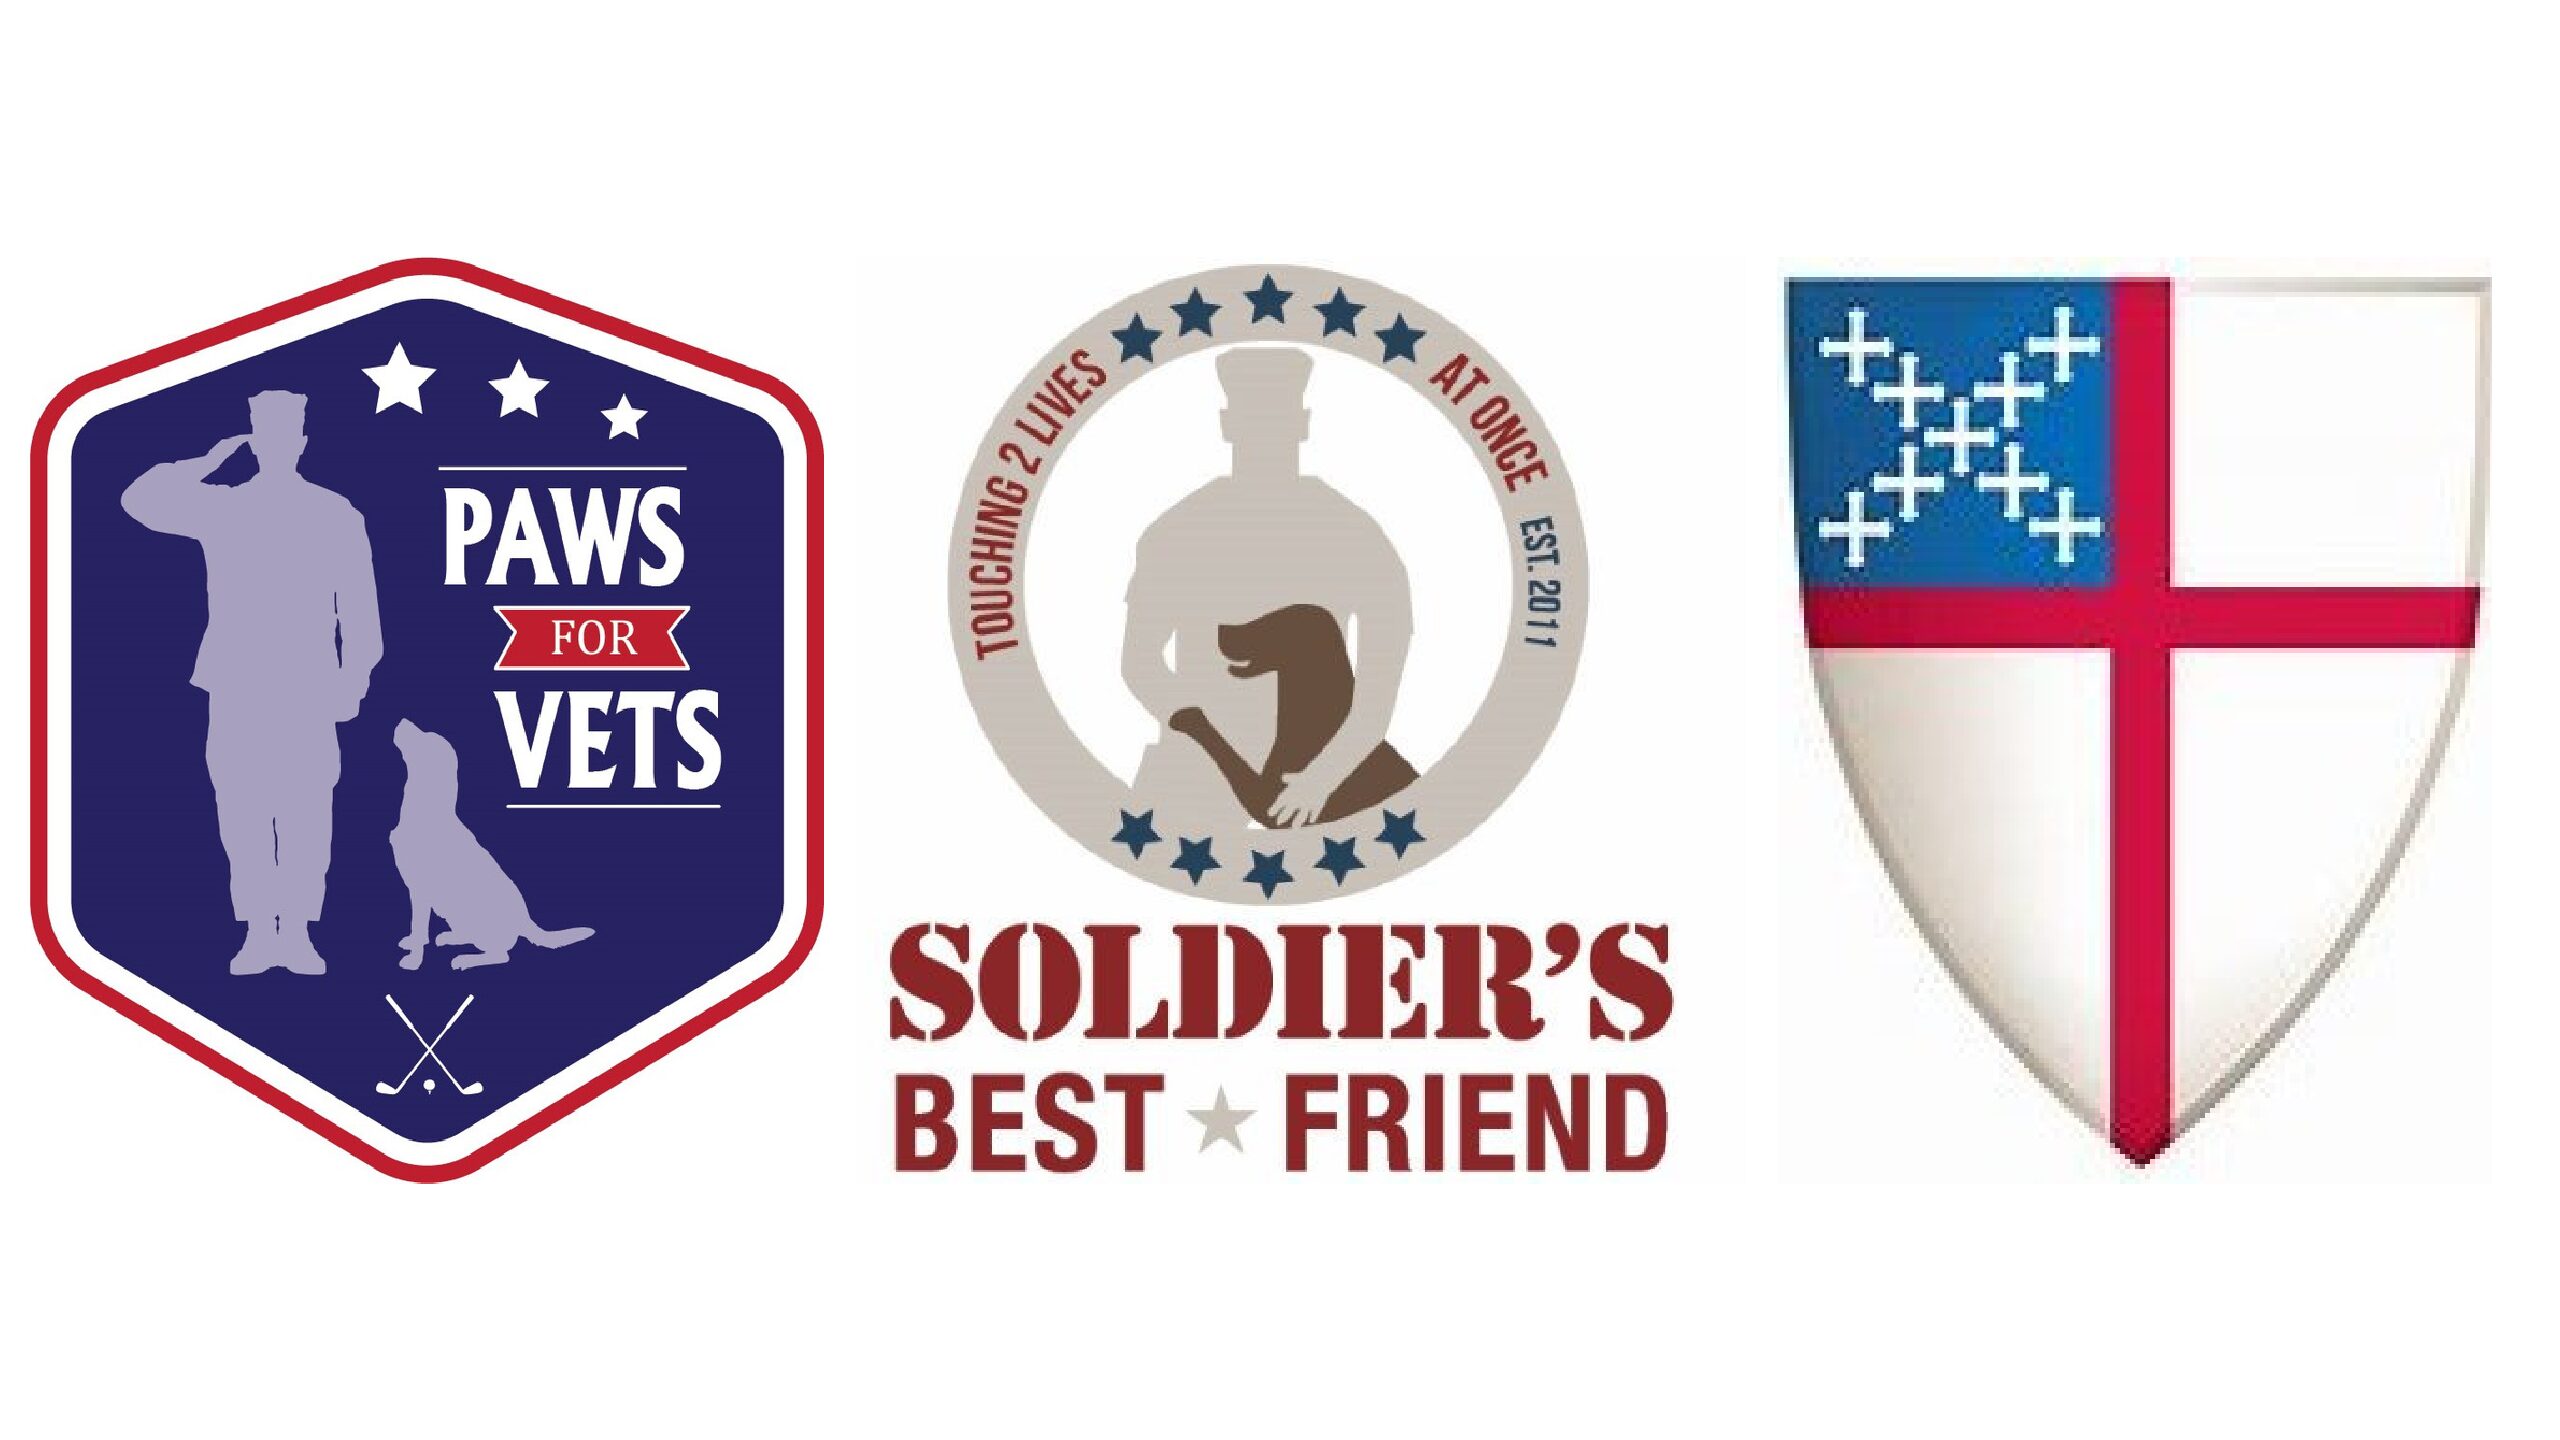 “Paws for Vets” 2023 Golf Tournament for Soldiers Best Friend